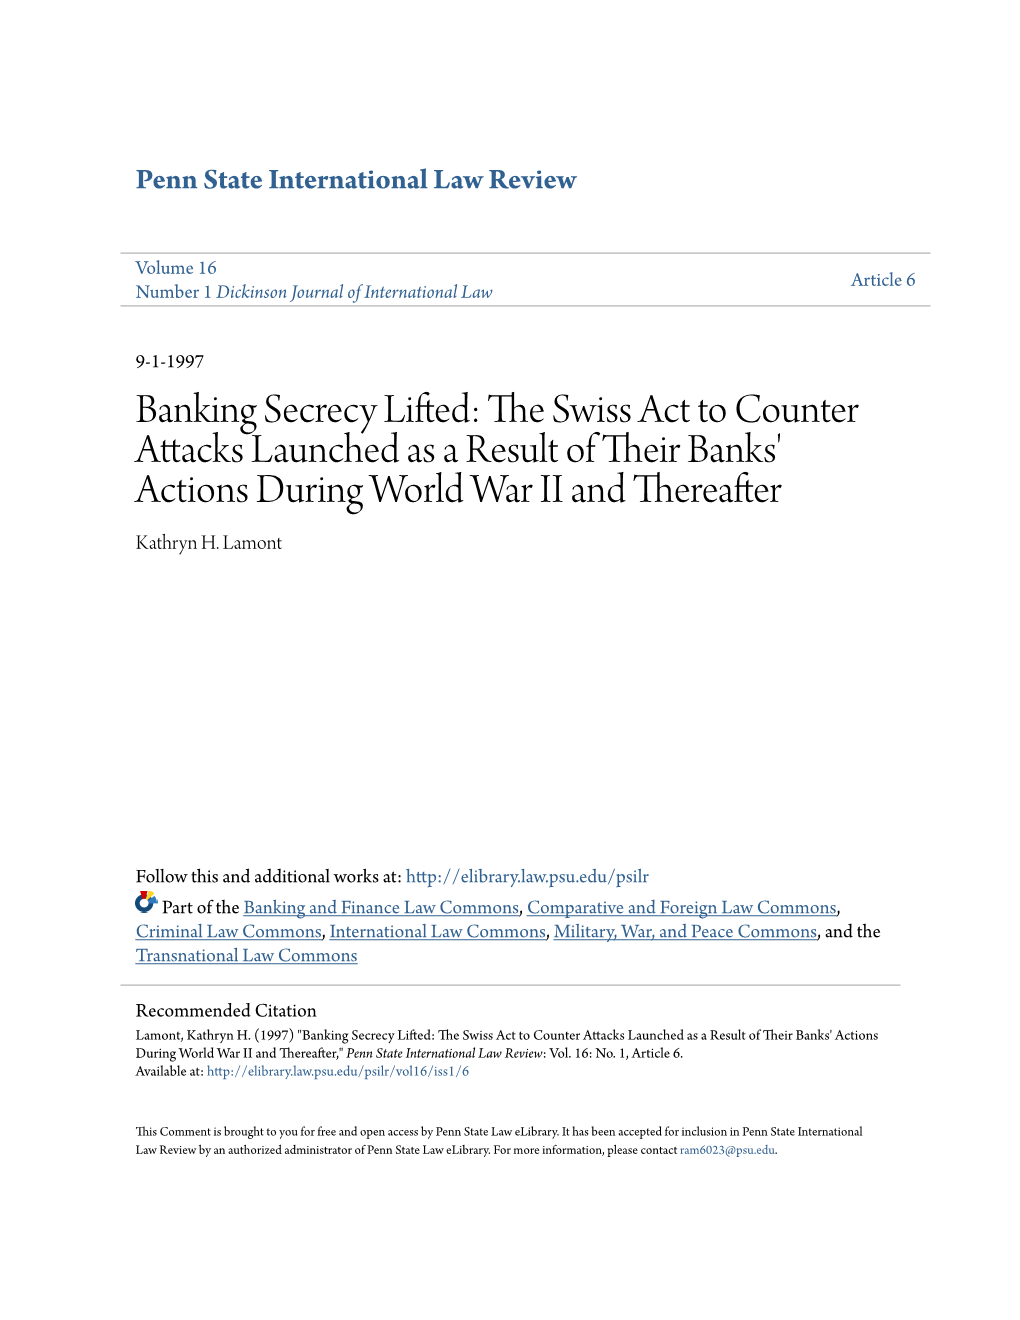 Banking Secrecy Lifted: the Ws Iss Act to Counter Attacks Launched As a Result of Their Ab Nks' Actions During World War II and Thereafter Kathryn H